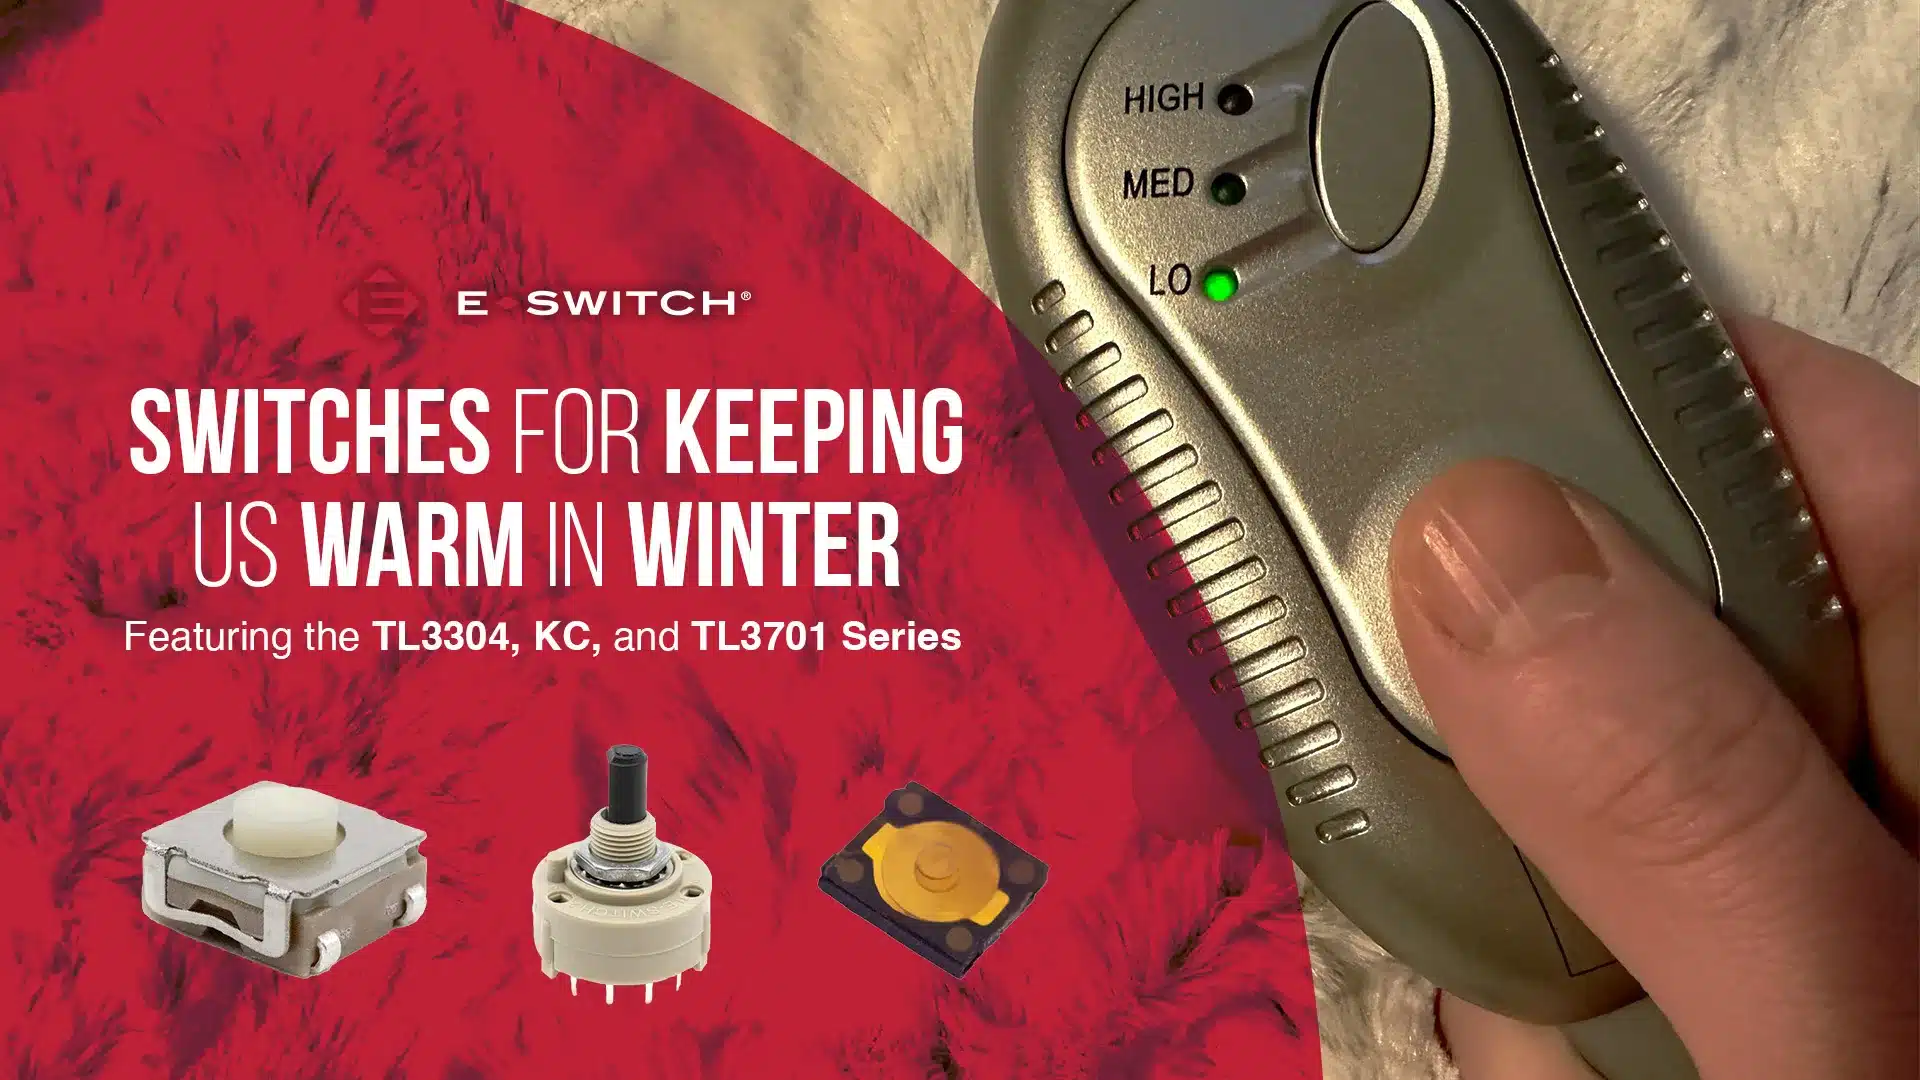 Switches For Keeping Us Warm In Winter Featuring The Tl3304, Kc, And Tl3701 Series